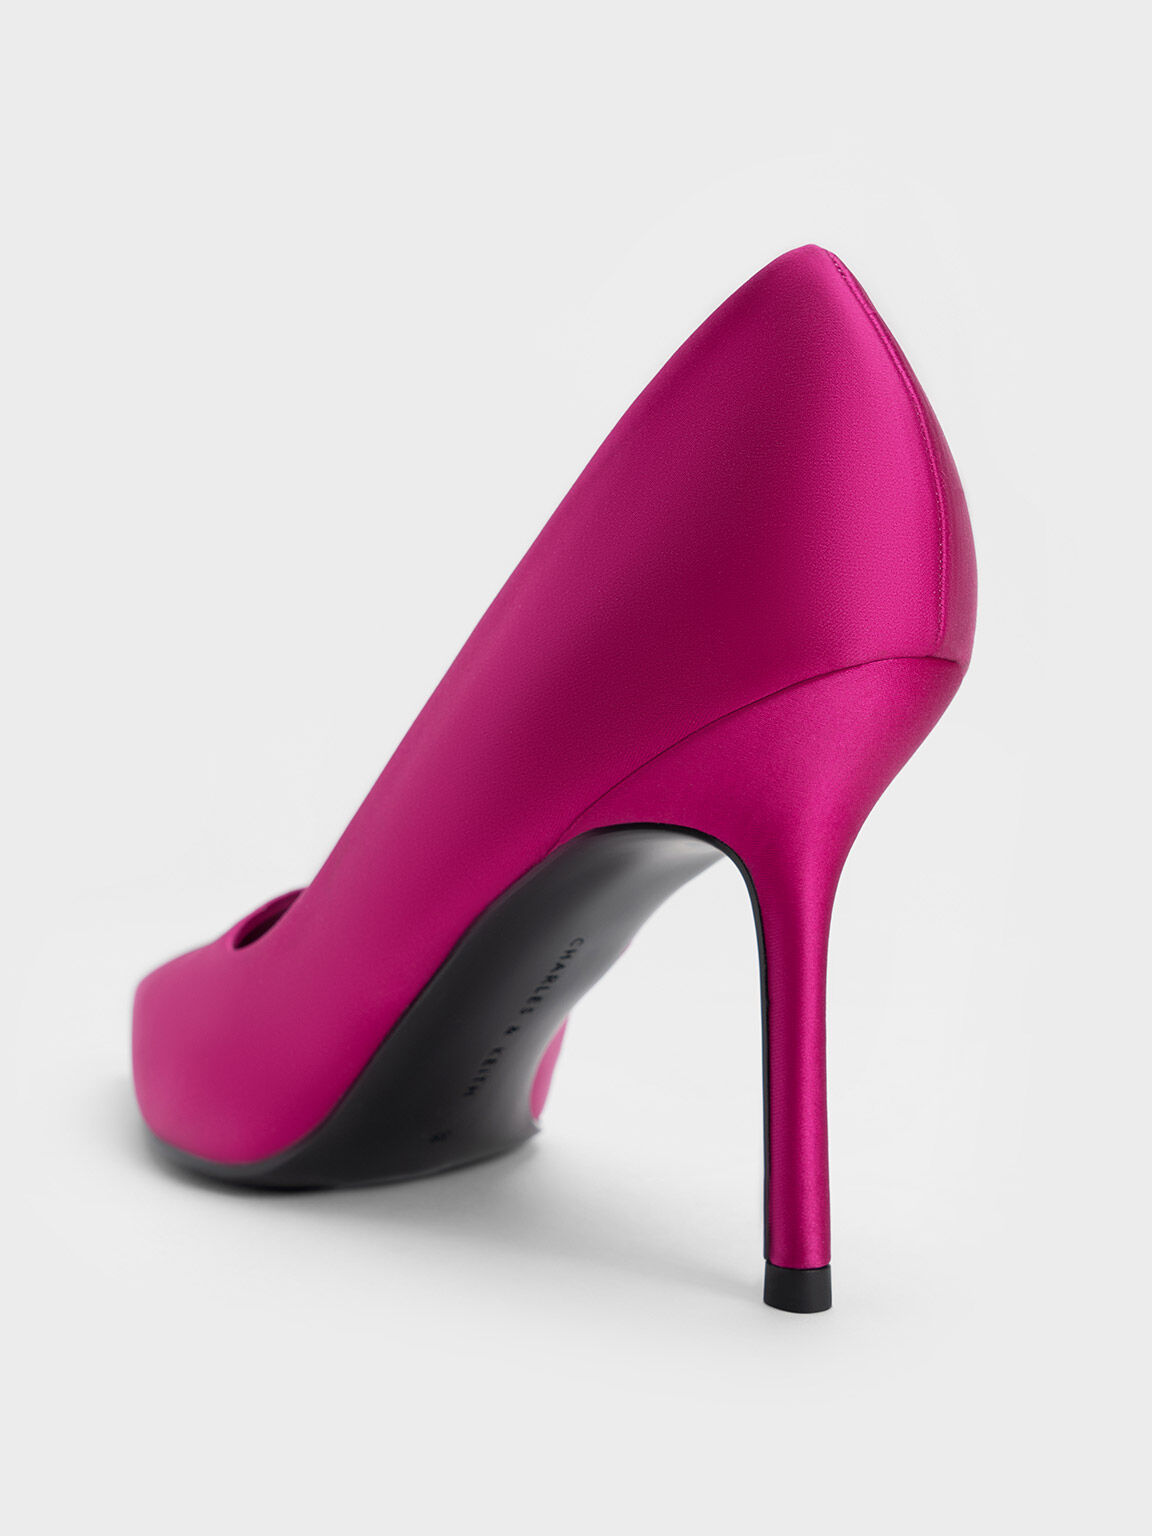 A True Muse Bow Heels in Hot Pink - Frock Candy